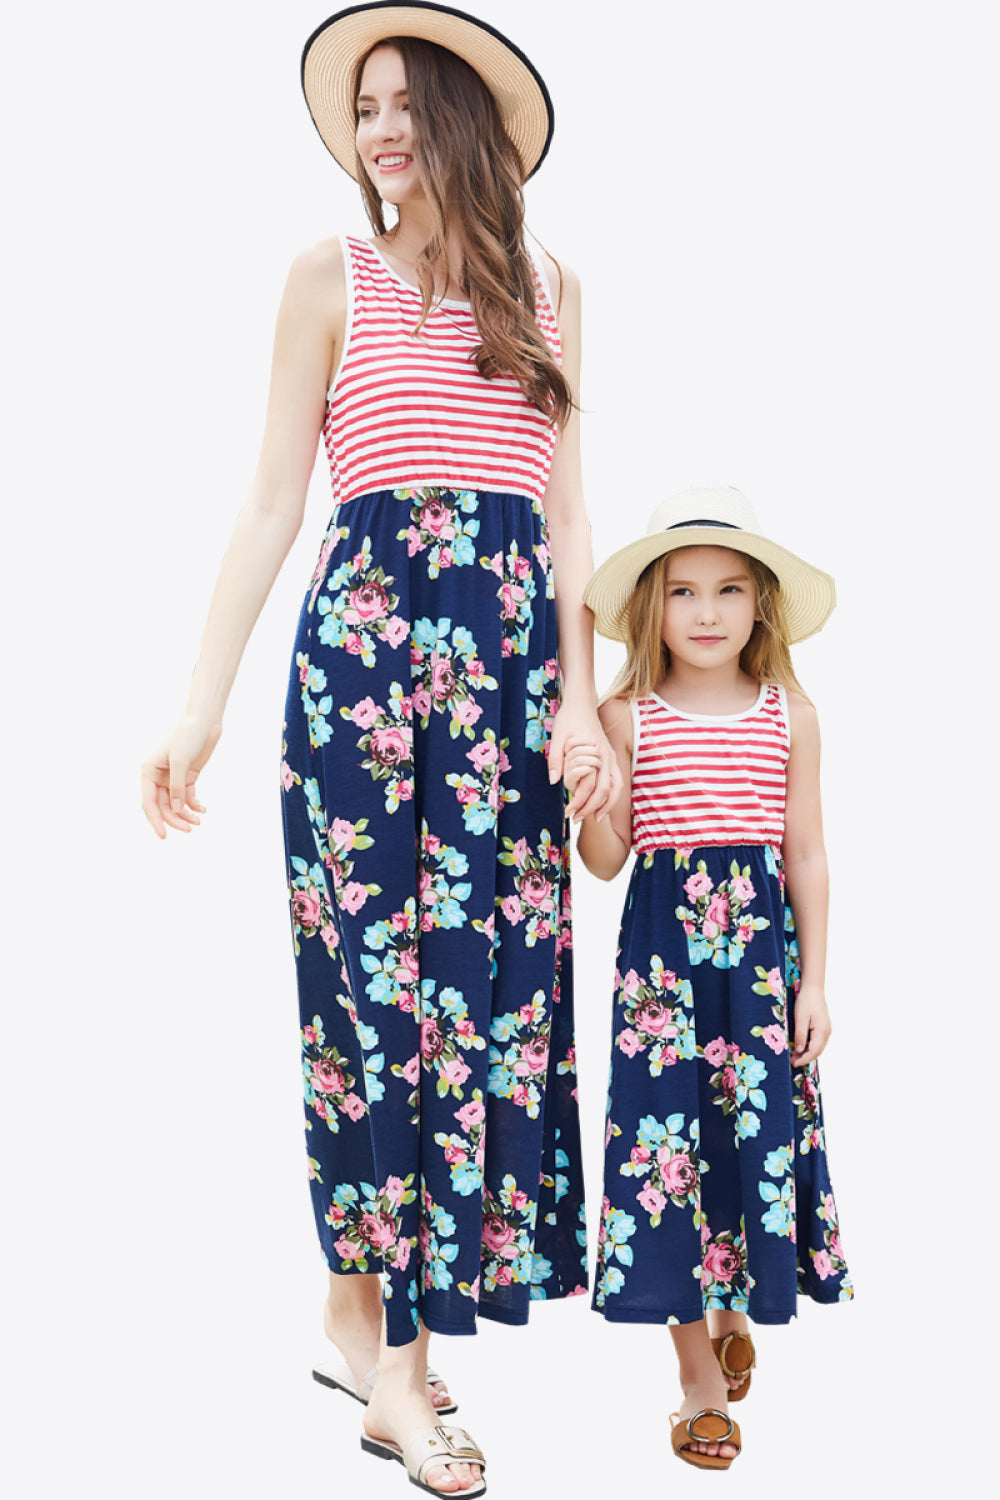 Women Striped Floral Sleeveless Dress (Mommy and Me Set)